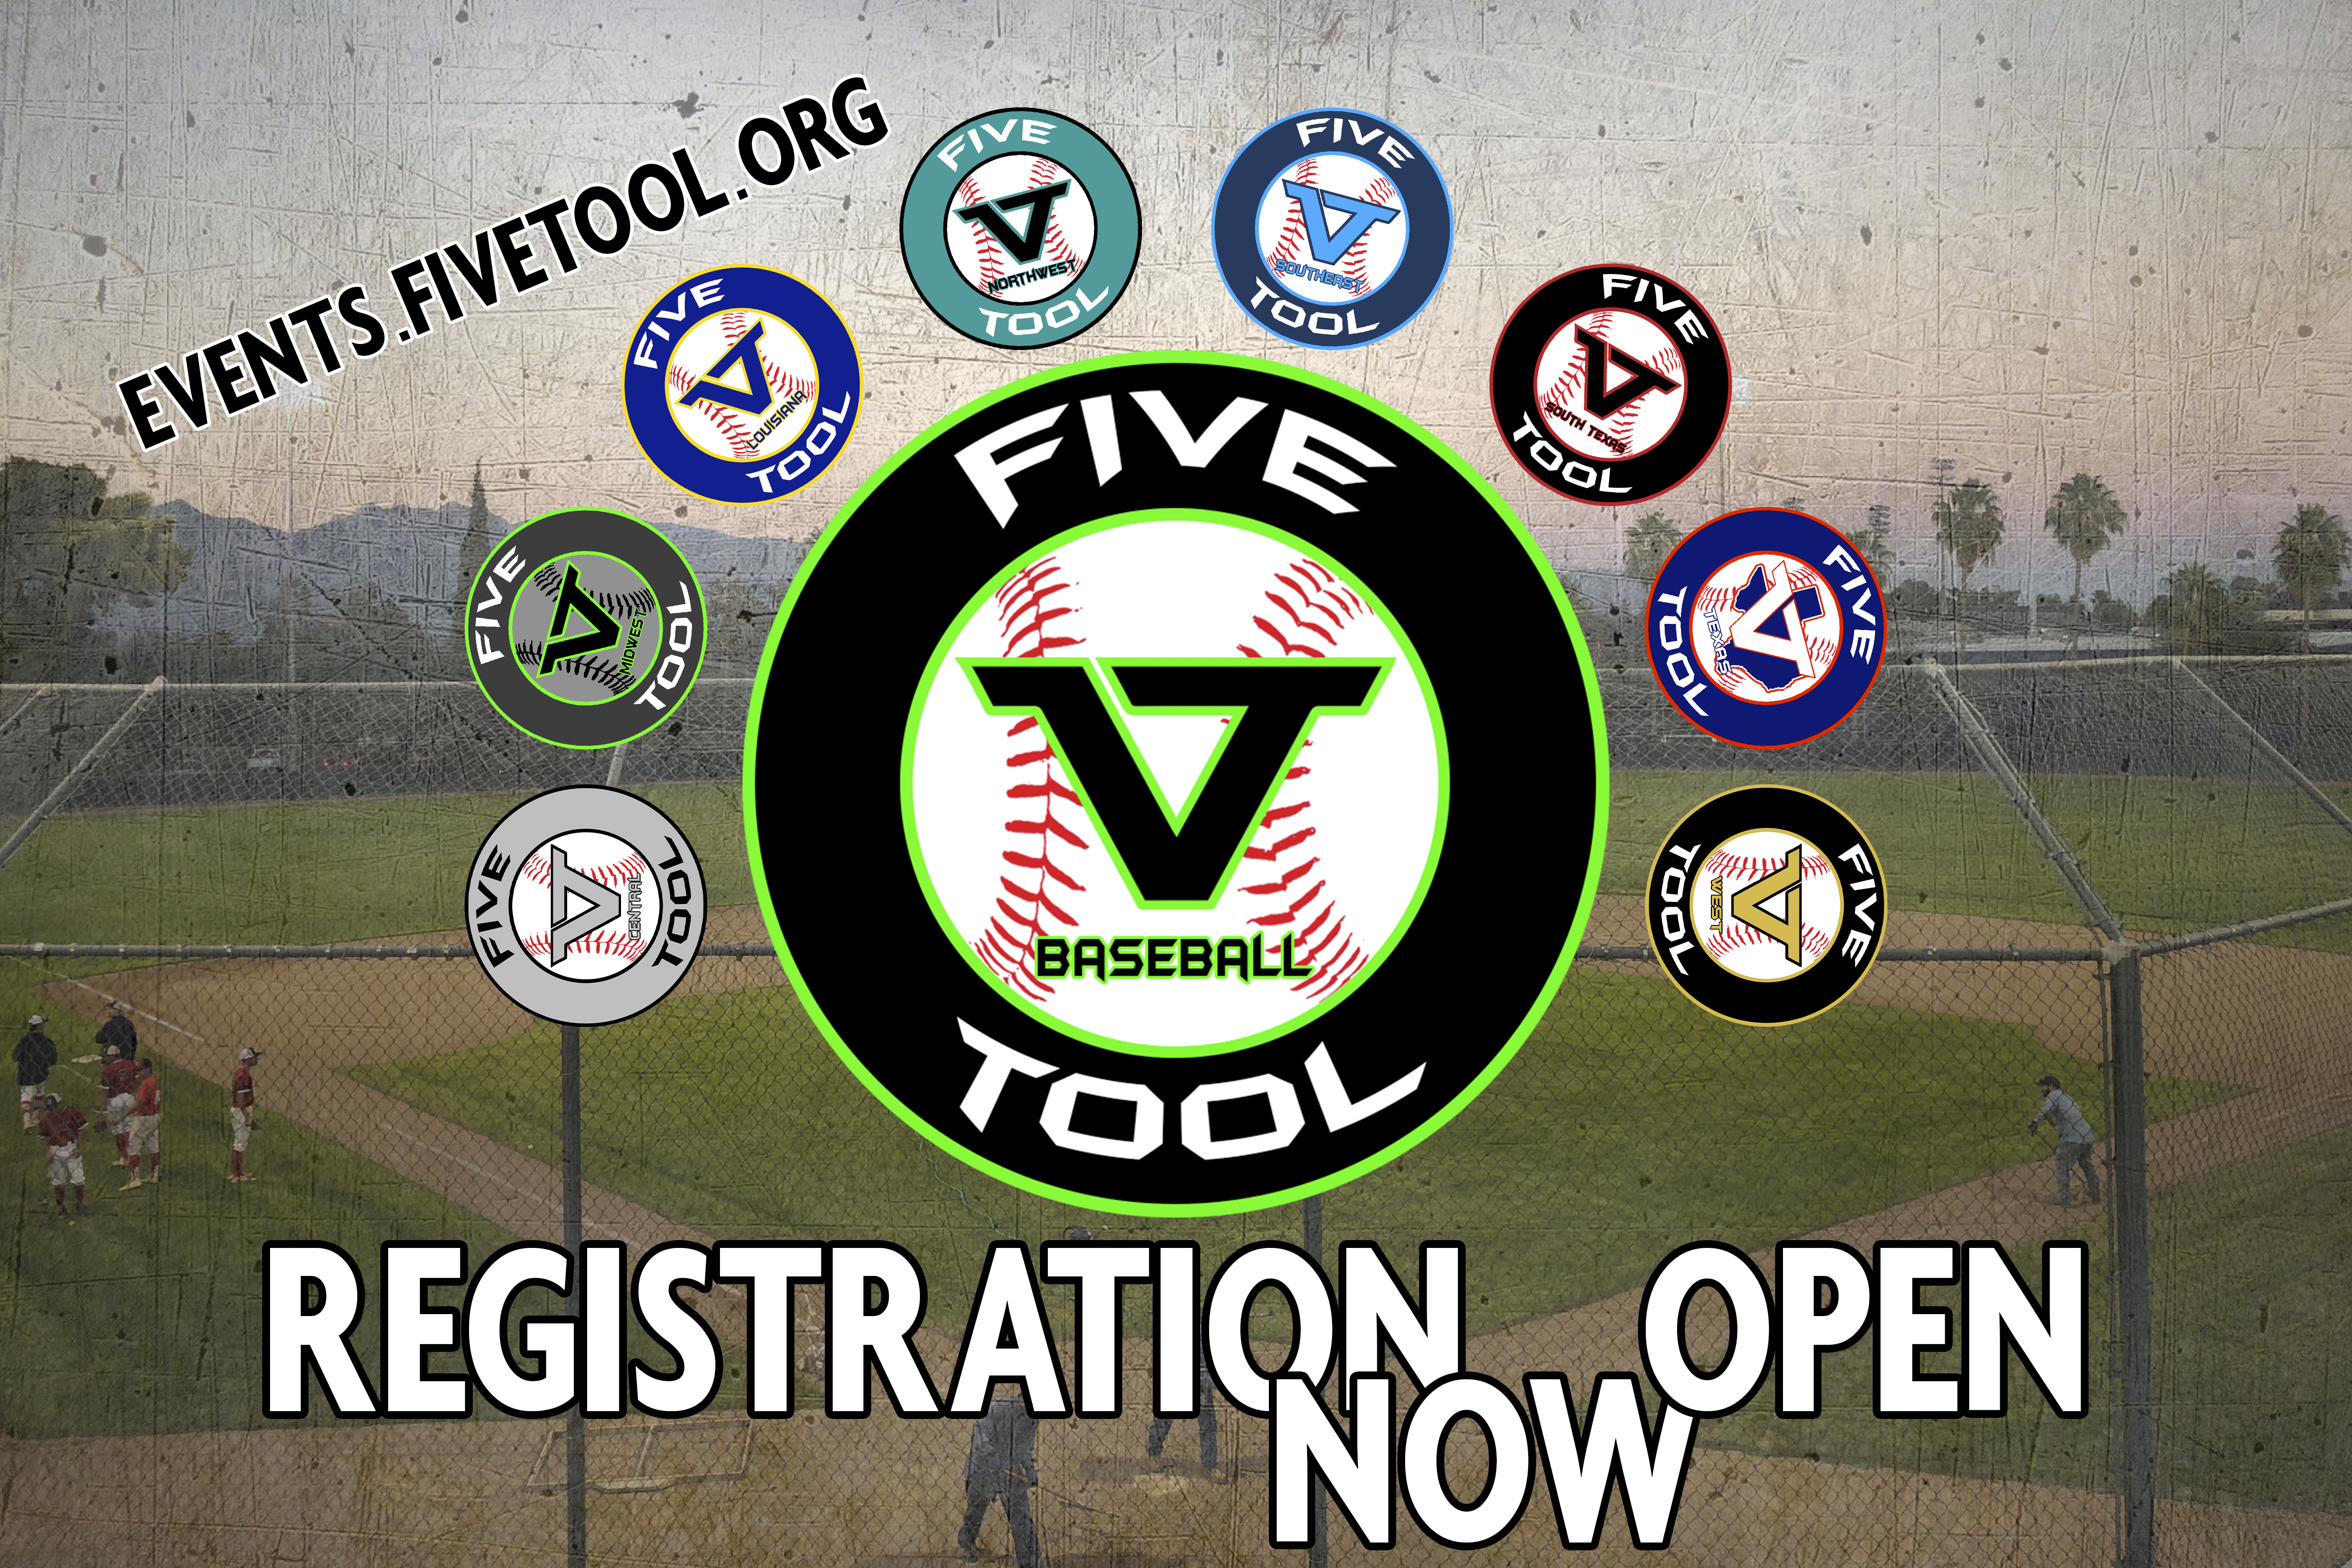 Registration Open Now for Five Tool 2019 Events